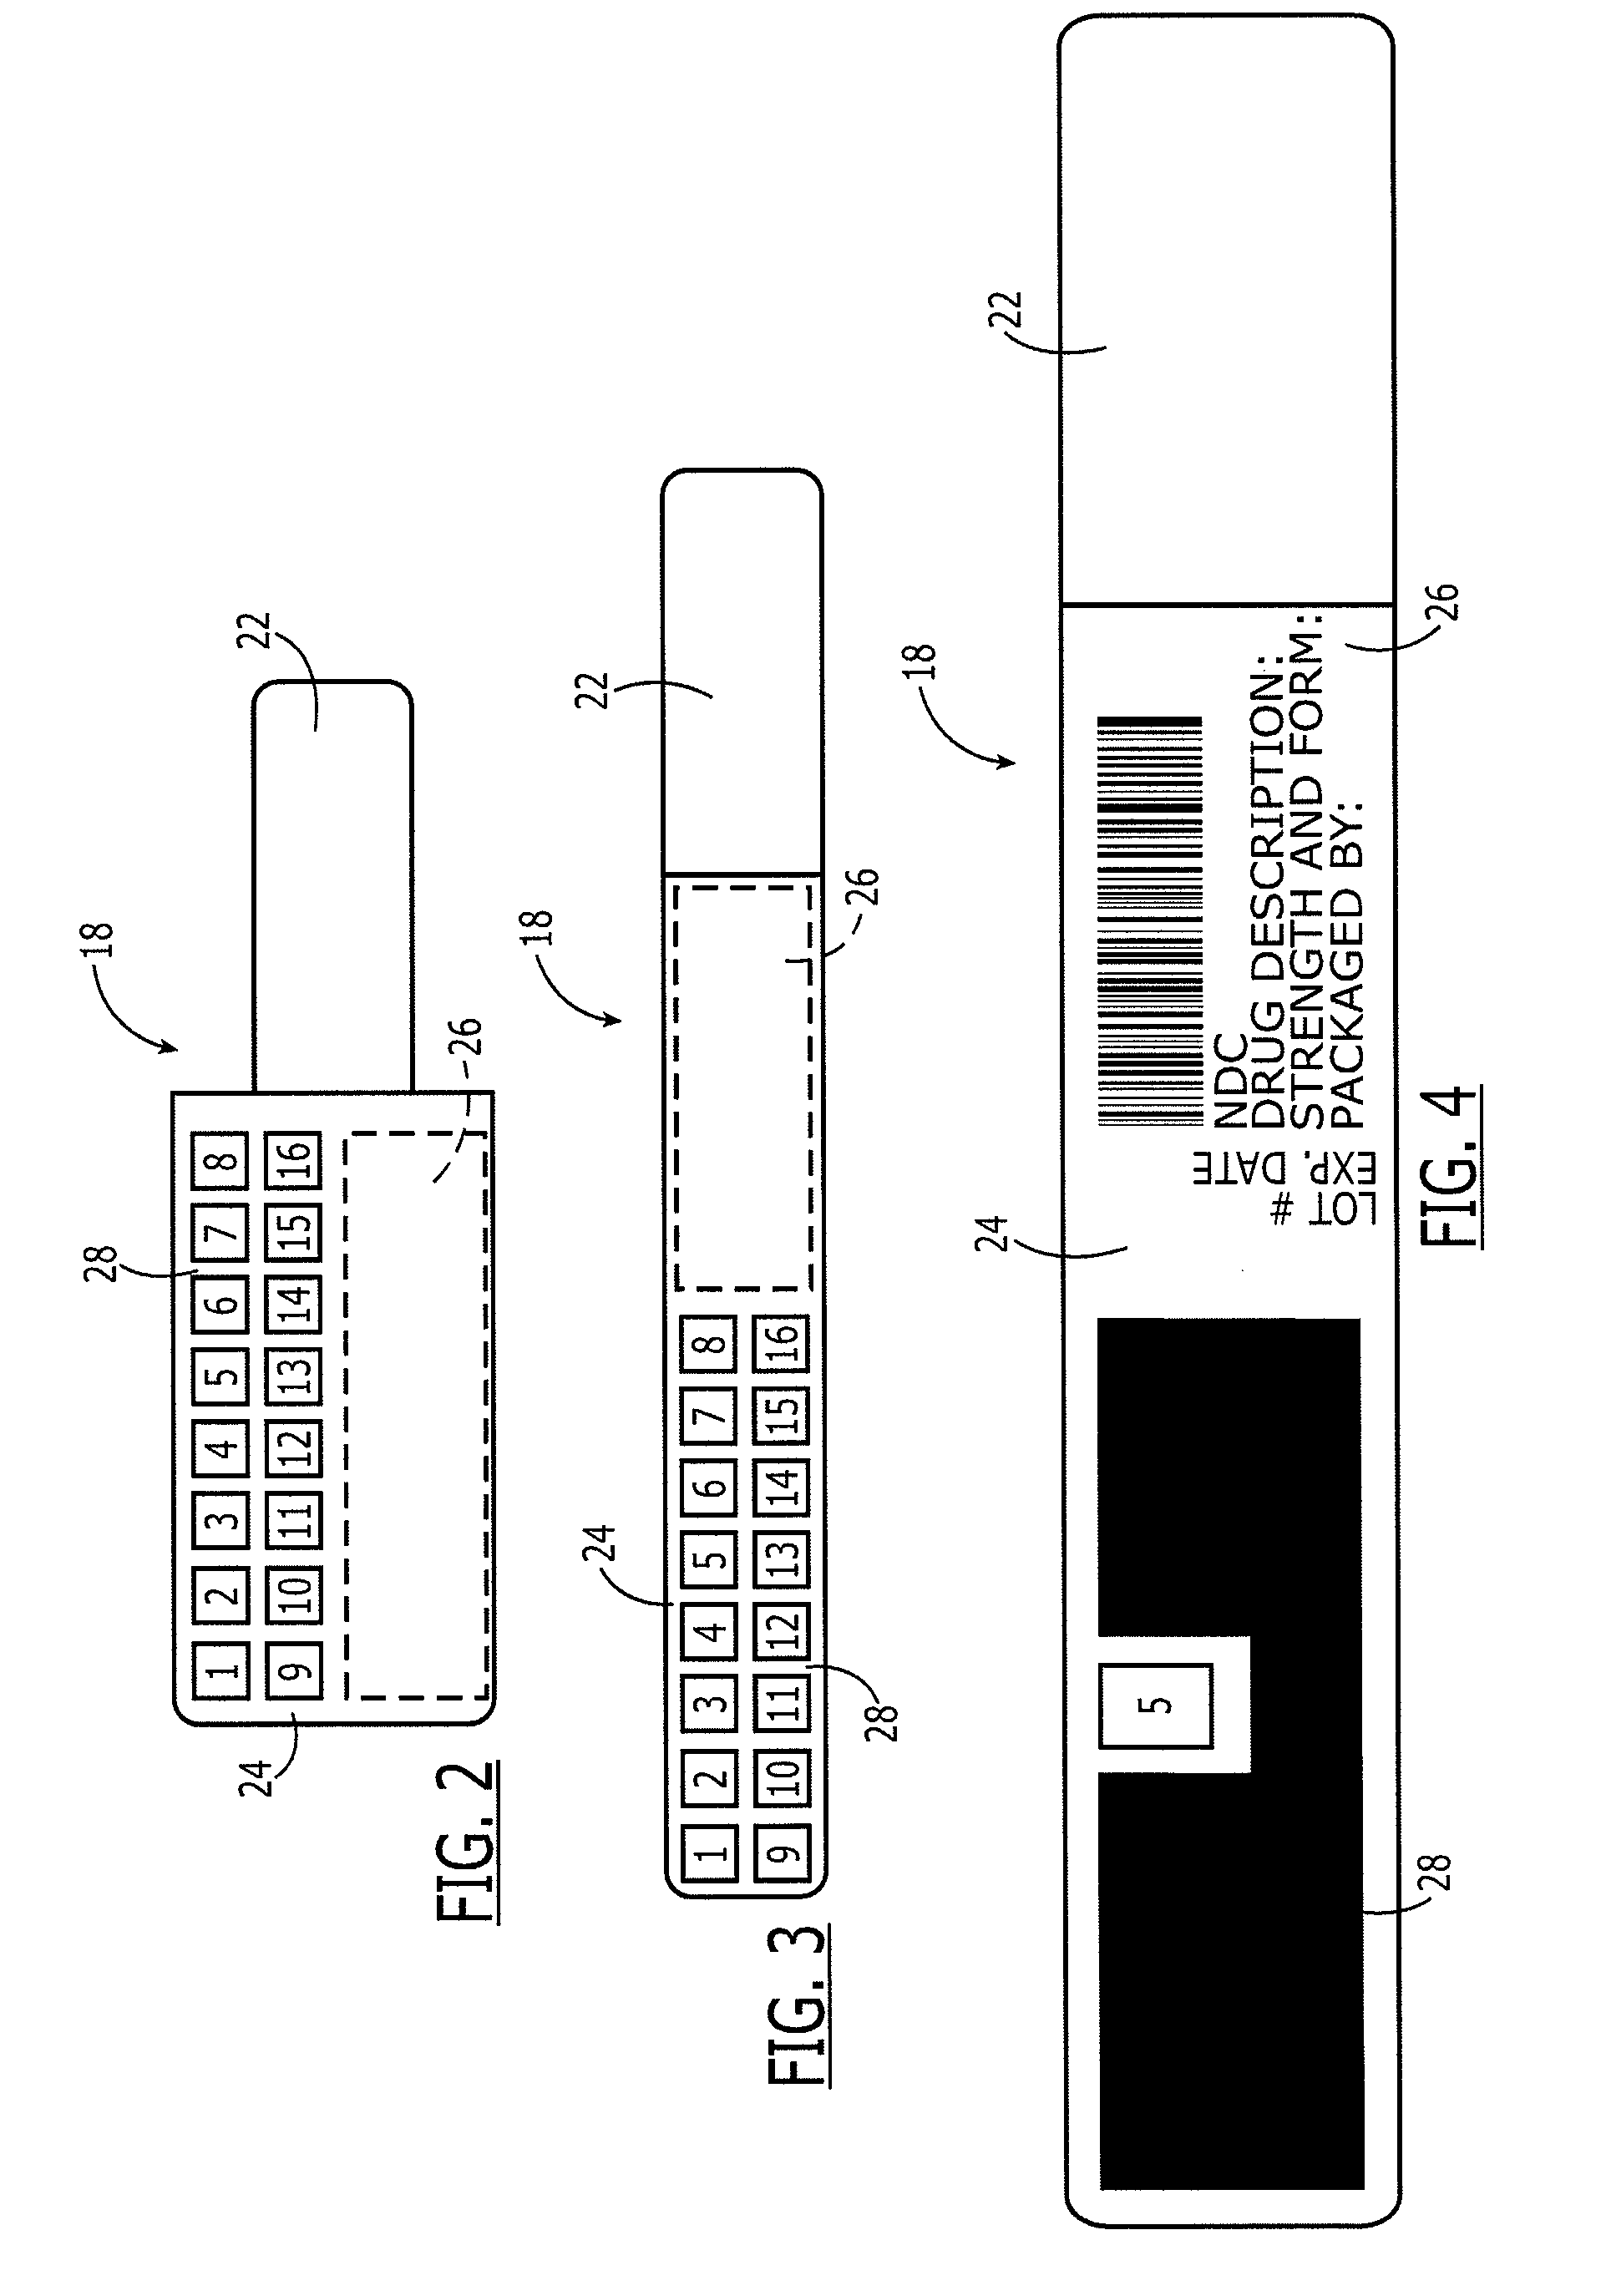 Visibly-Coded Medication Label And Associated Method, Apparatus And Computer Program Product For Providing Same